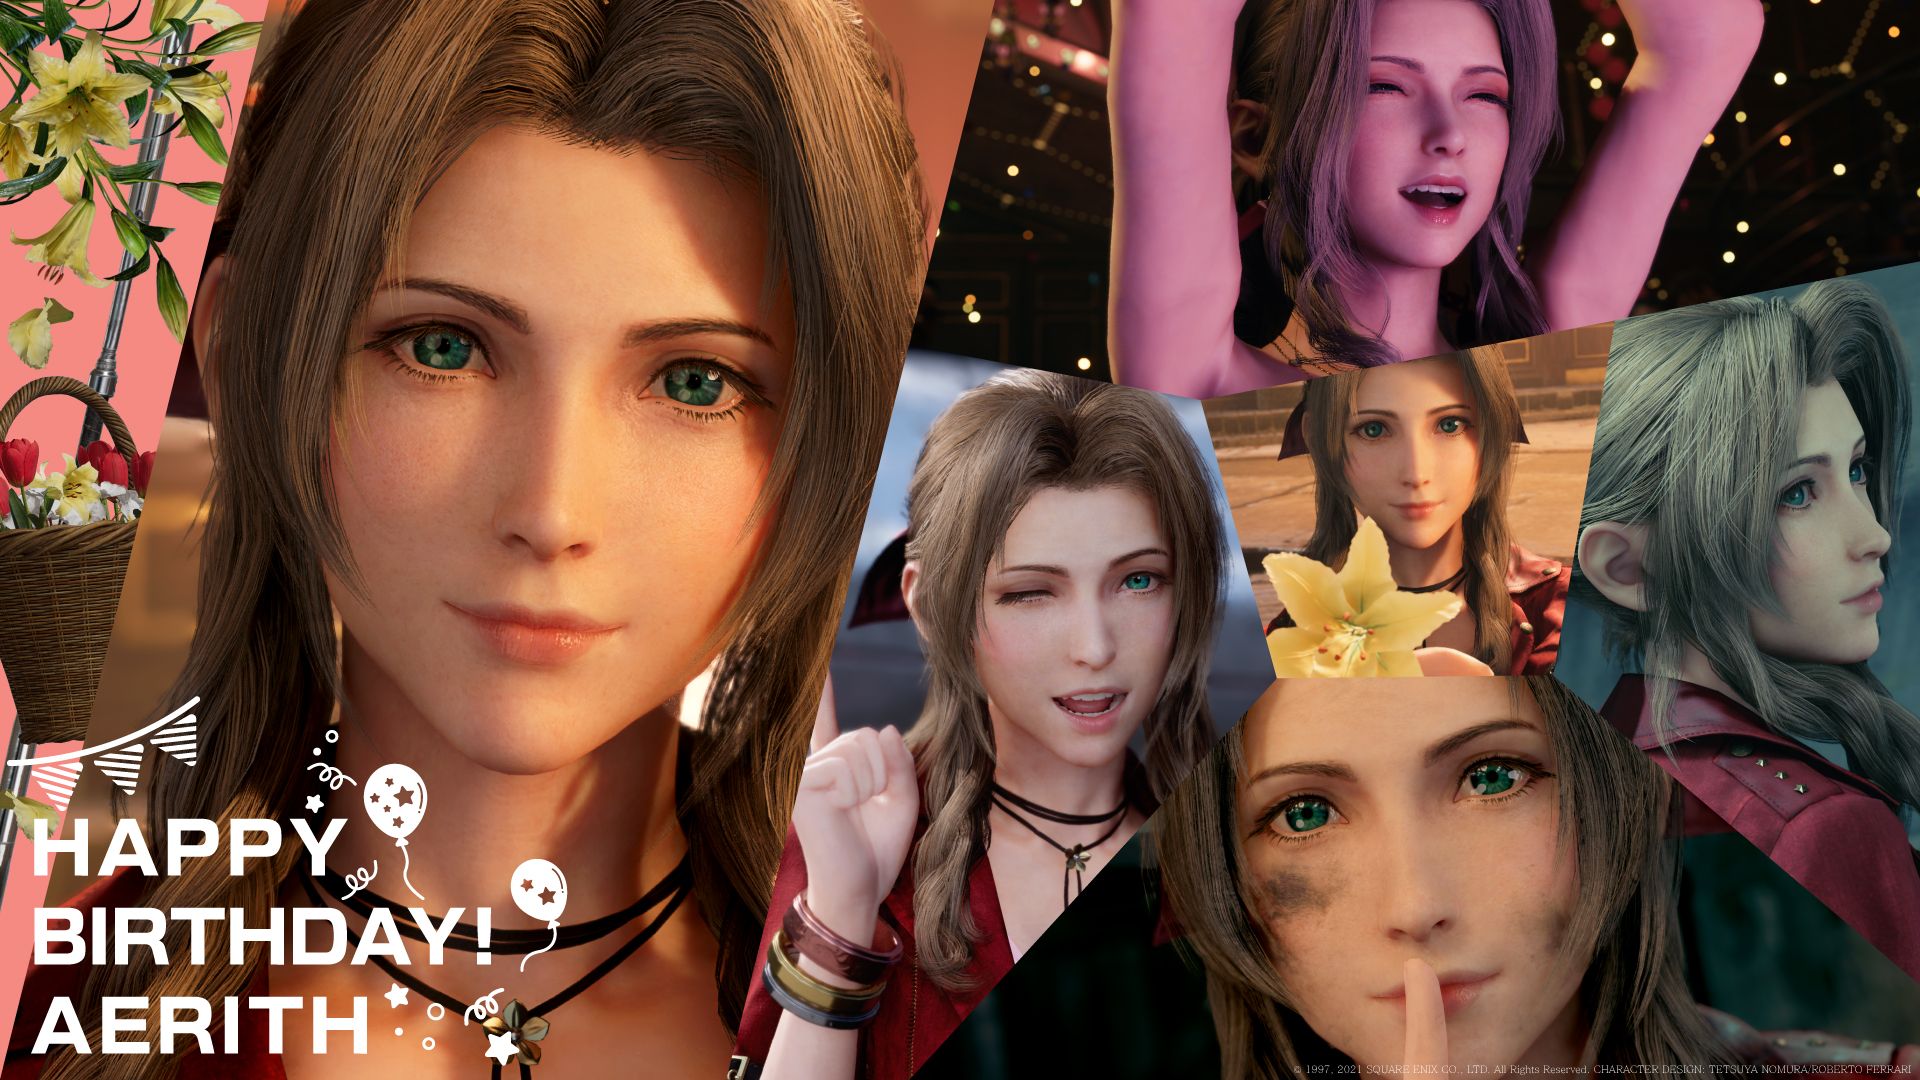 Aerith's Birthday Celebrated by Fans as We Wait For FF7 Remake Part 2